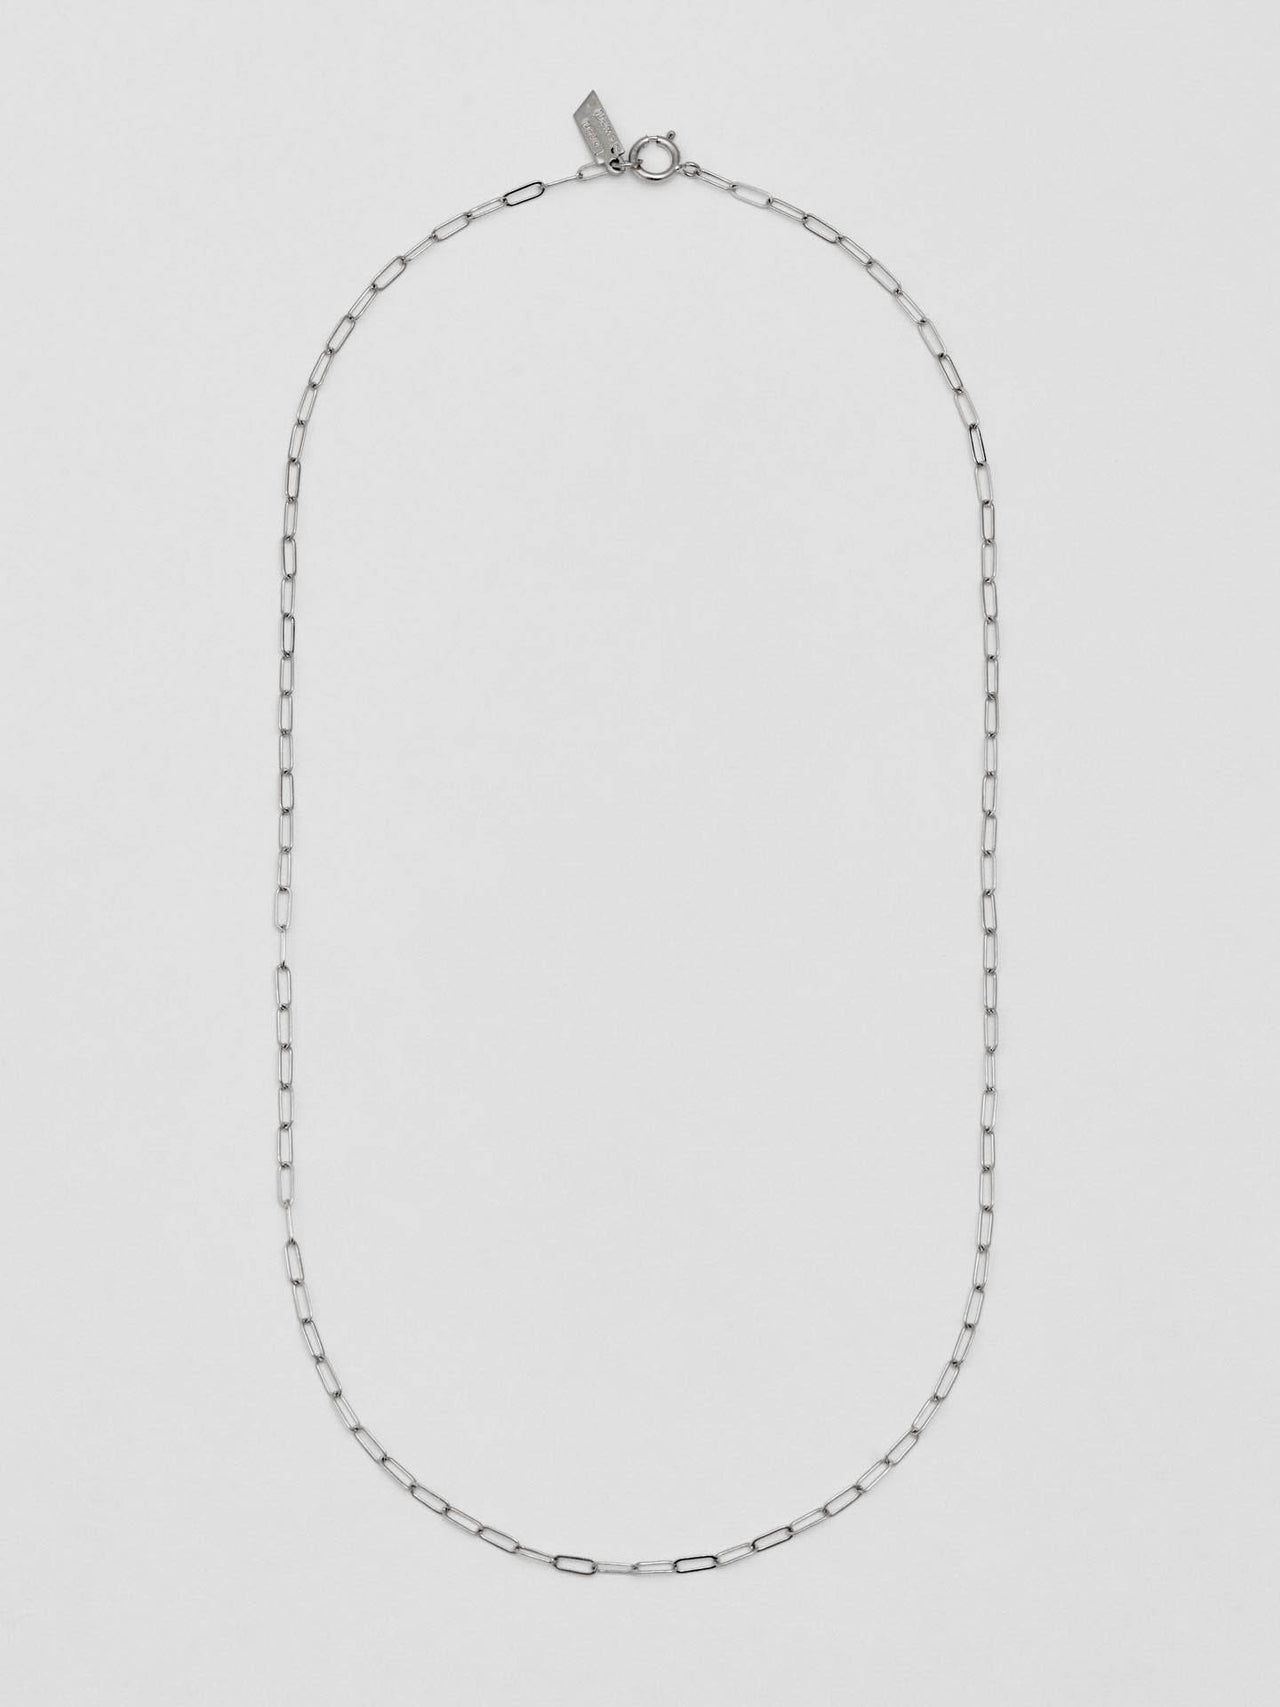 Full View of Sterling Silver Lightweight Long Link Chain pictured on light grey background.